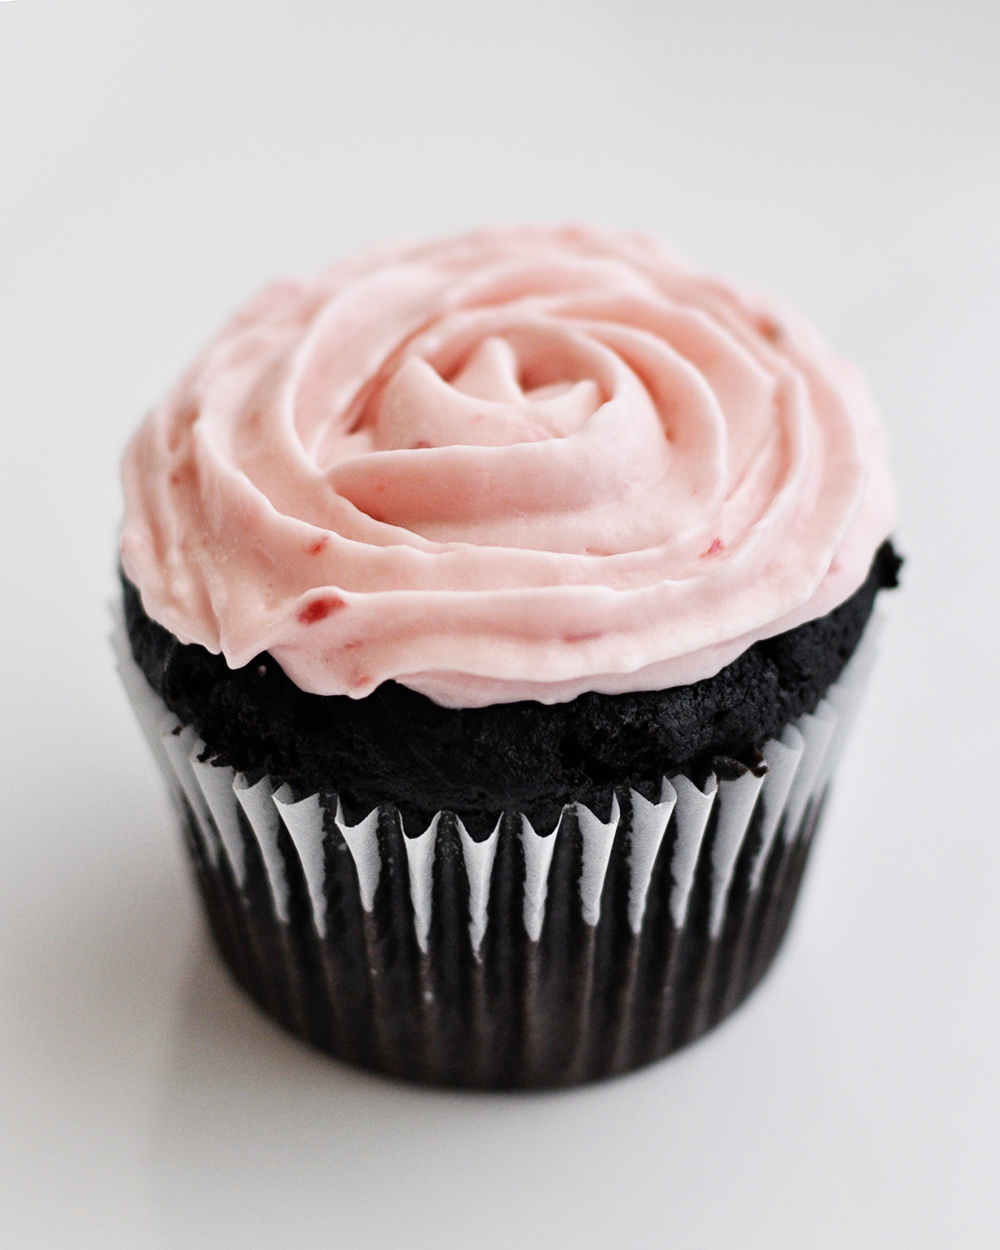 Dark Chocolate Cupcakes with Strawberry Cream Cheese Frosting